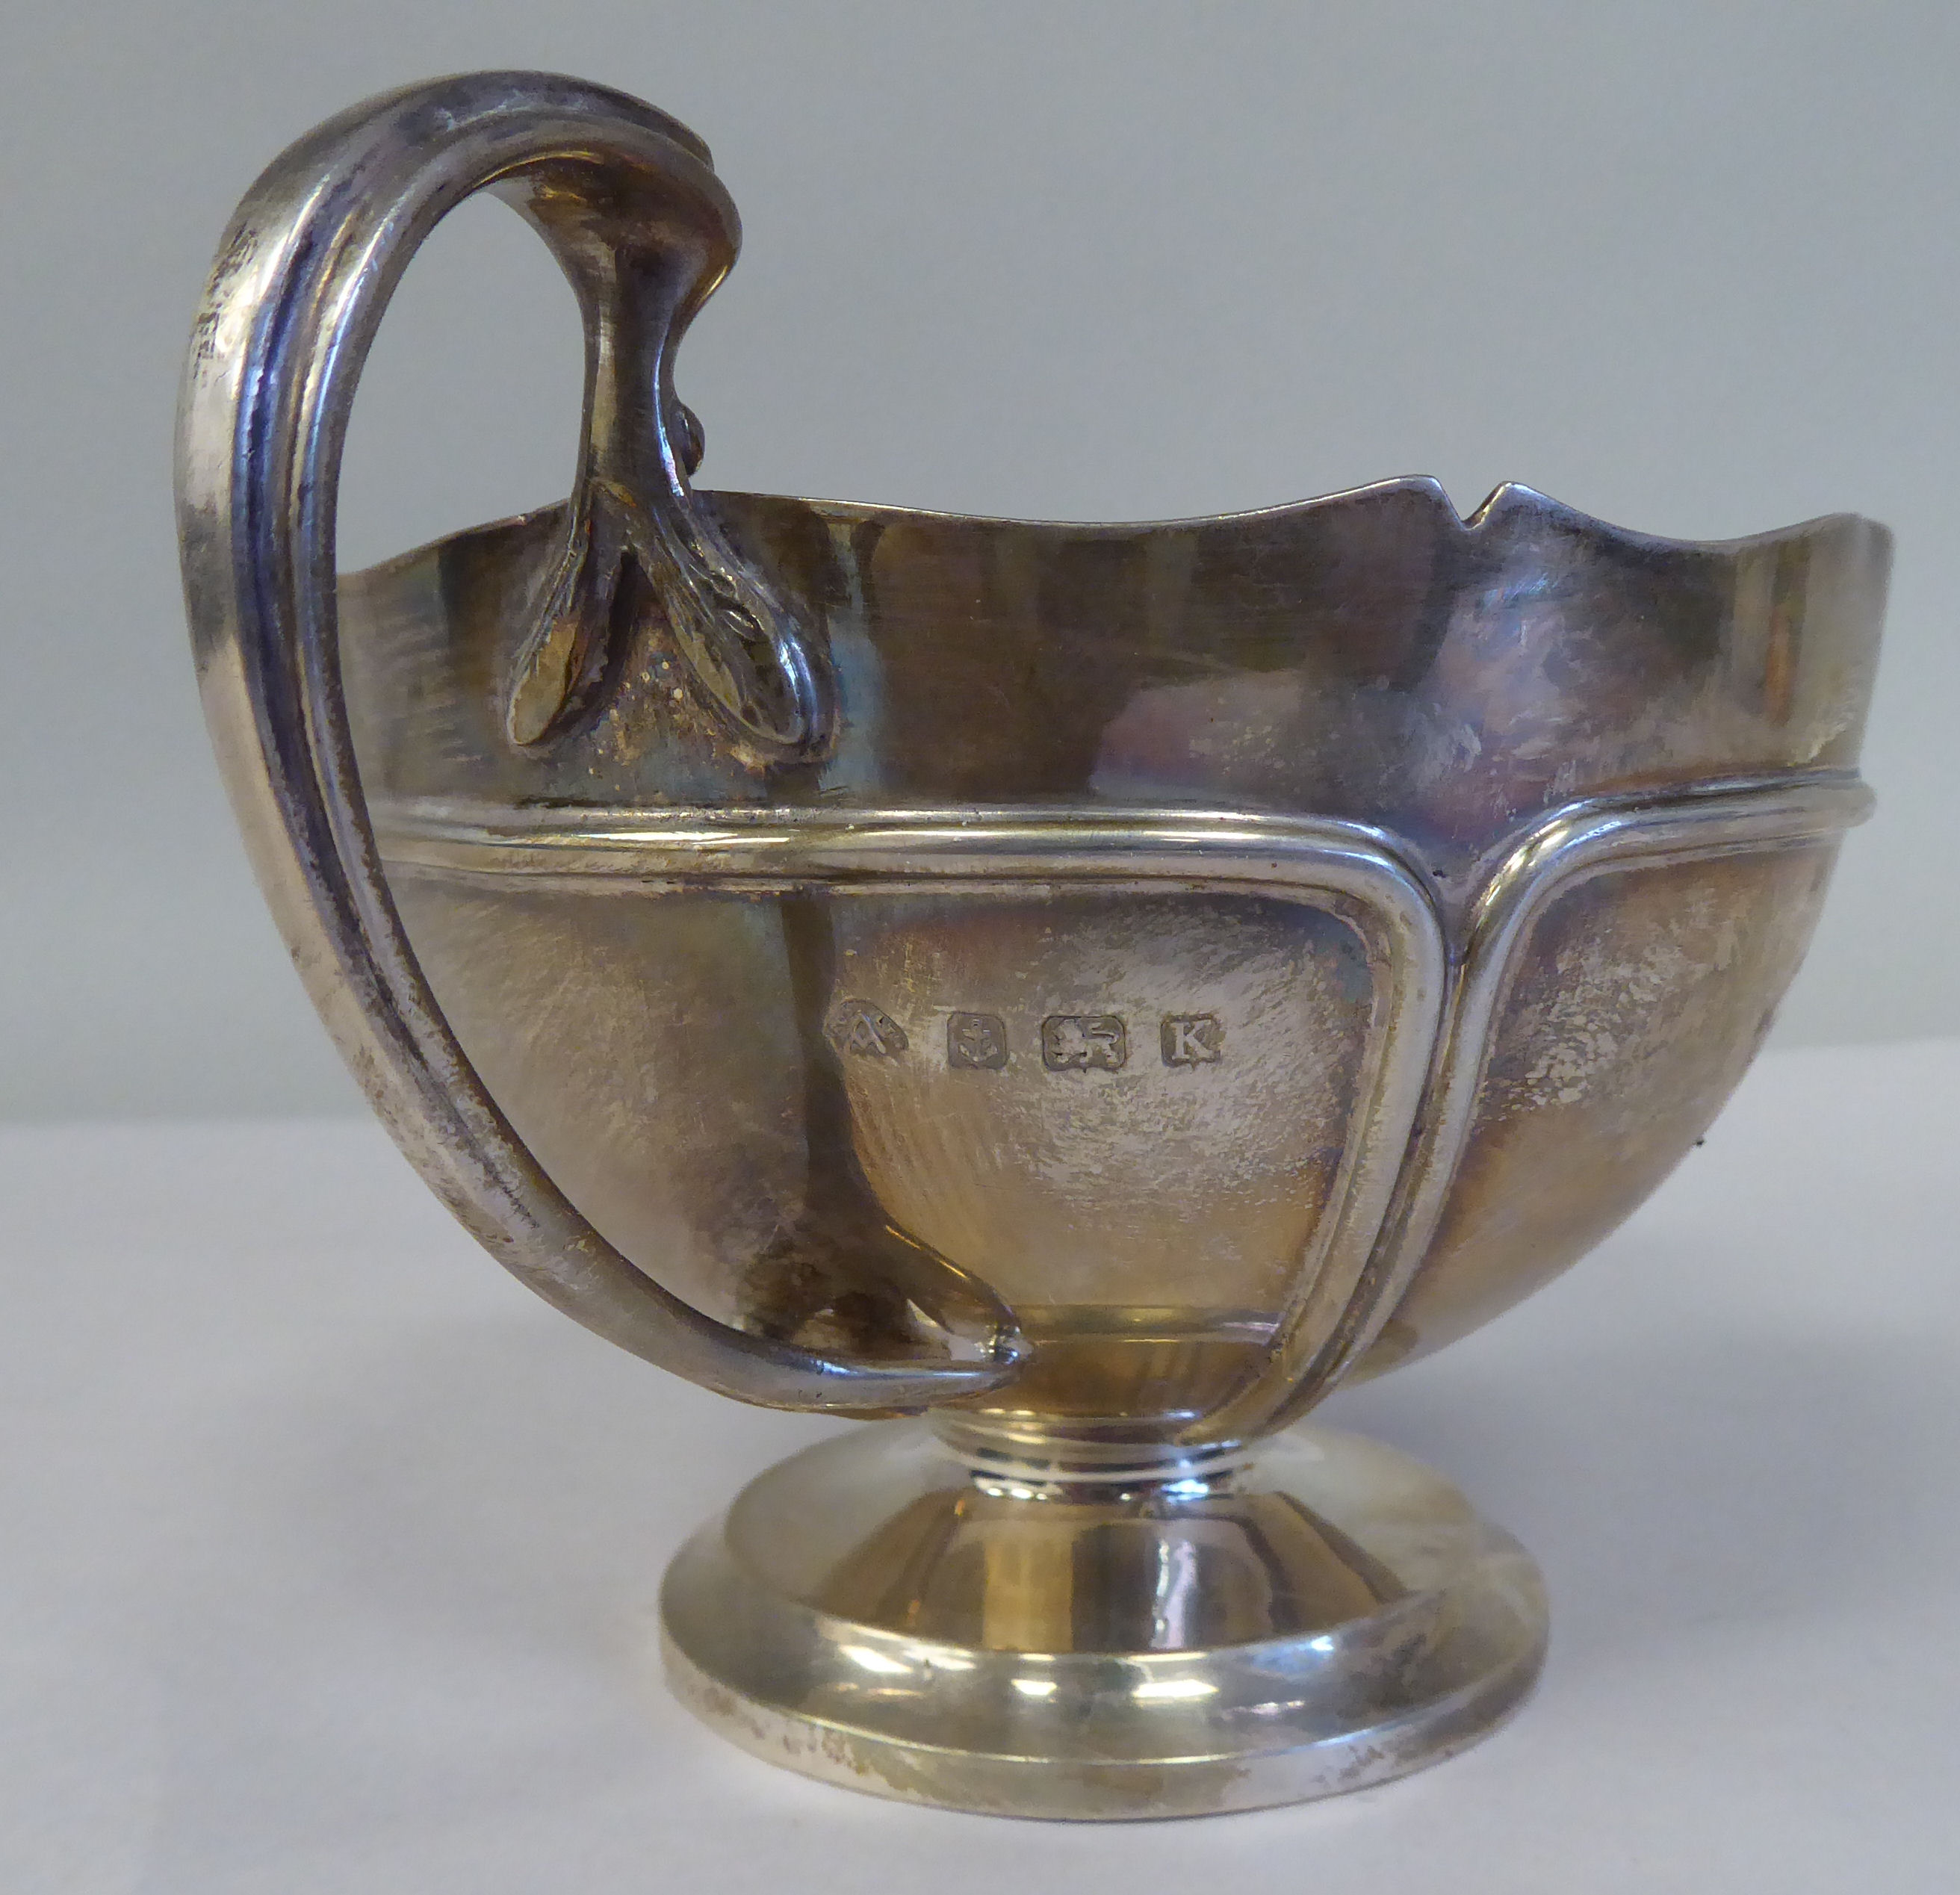 A four piece silver tea set, comprising a teapot of pedestal bowl display with an S-swept swept, - Image 12 of 12